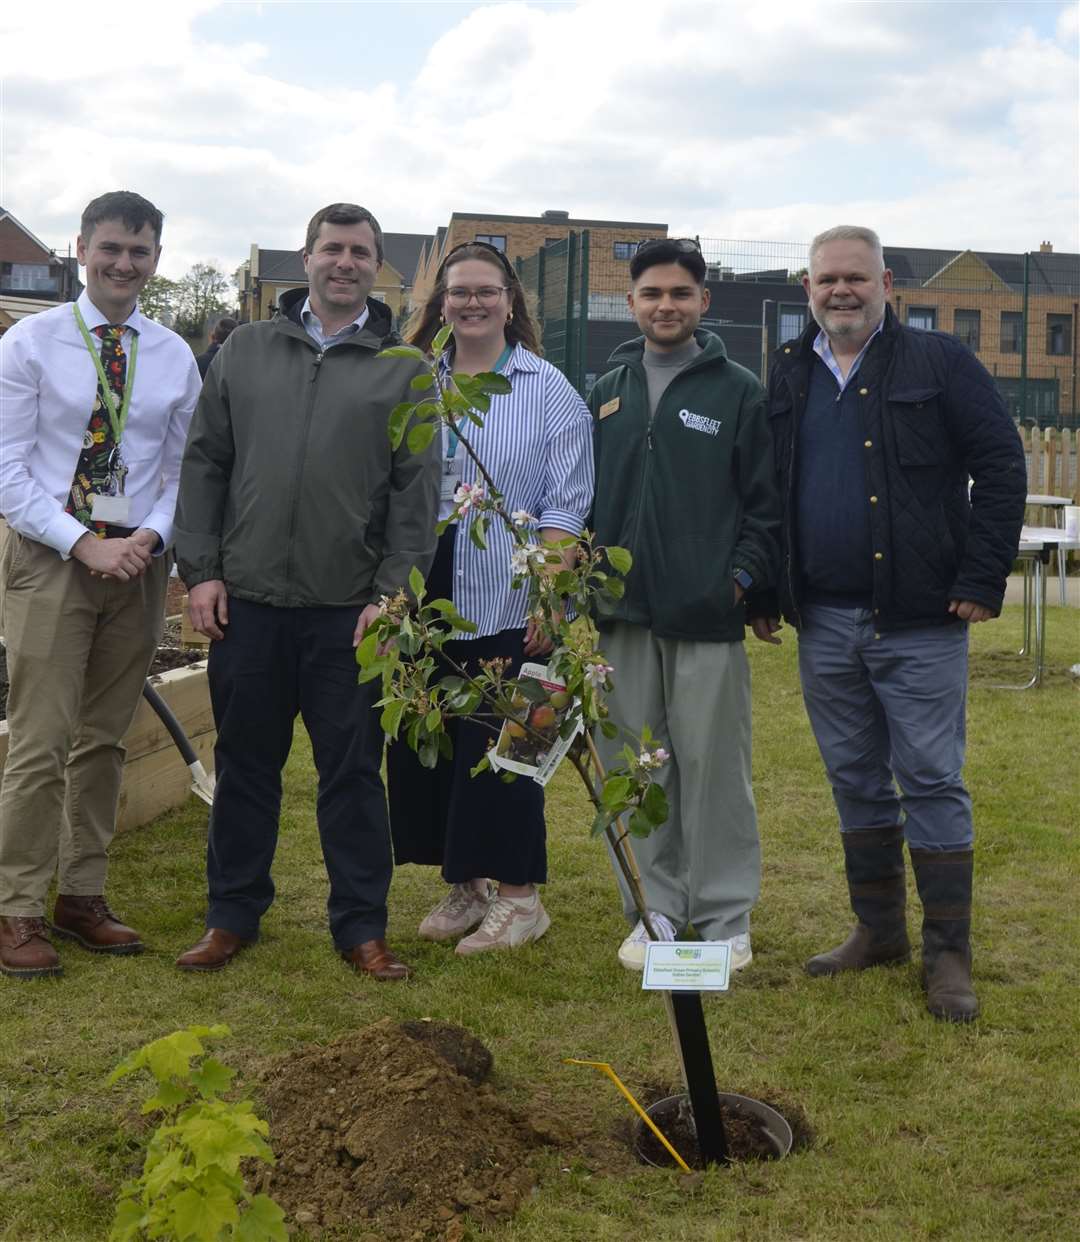 From left: Interim headteacher Joshua Croucher, Mark Pullin (EDC), Katie-Louise Lawrence, Harry Zimmerman (EDC) and Kevin McGeough (EDC) with a tree donated to Ebbsfleet Primary School by Ebbsfleet Development Corporation. Photo credit: Poppy Webster